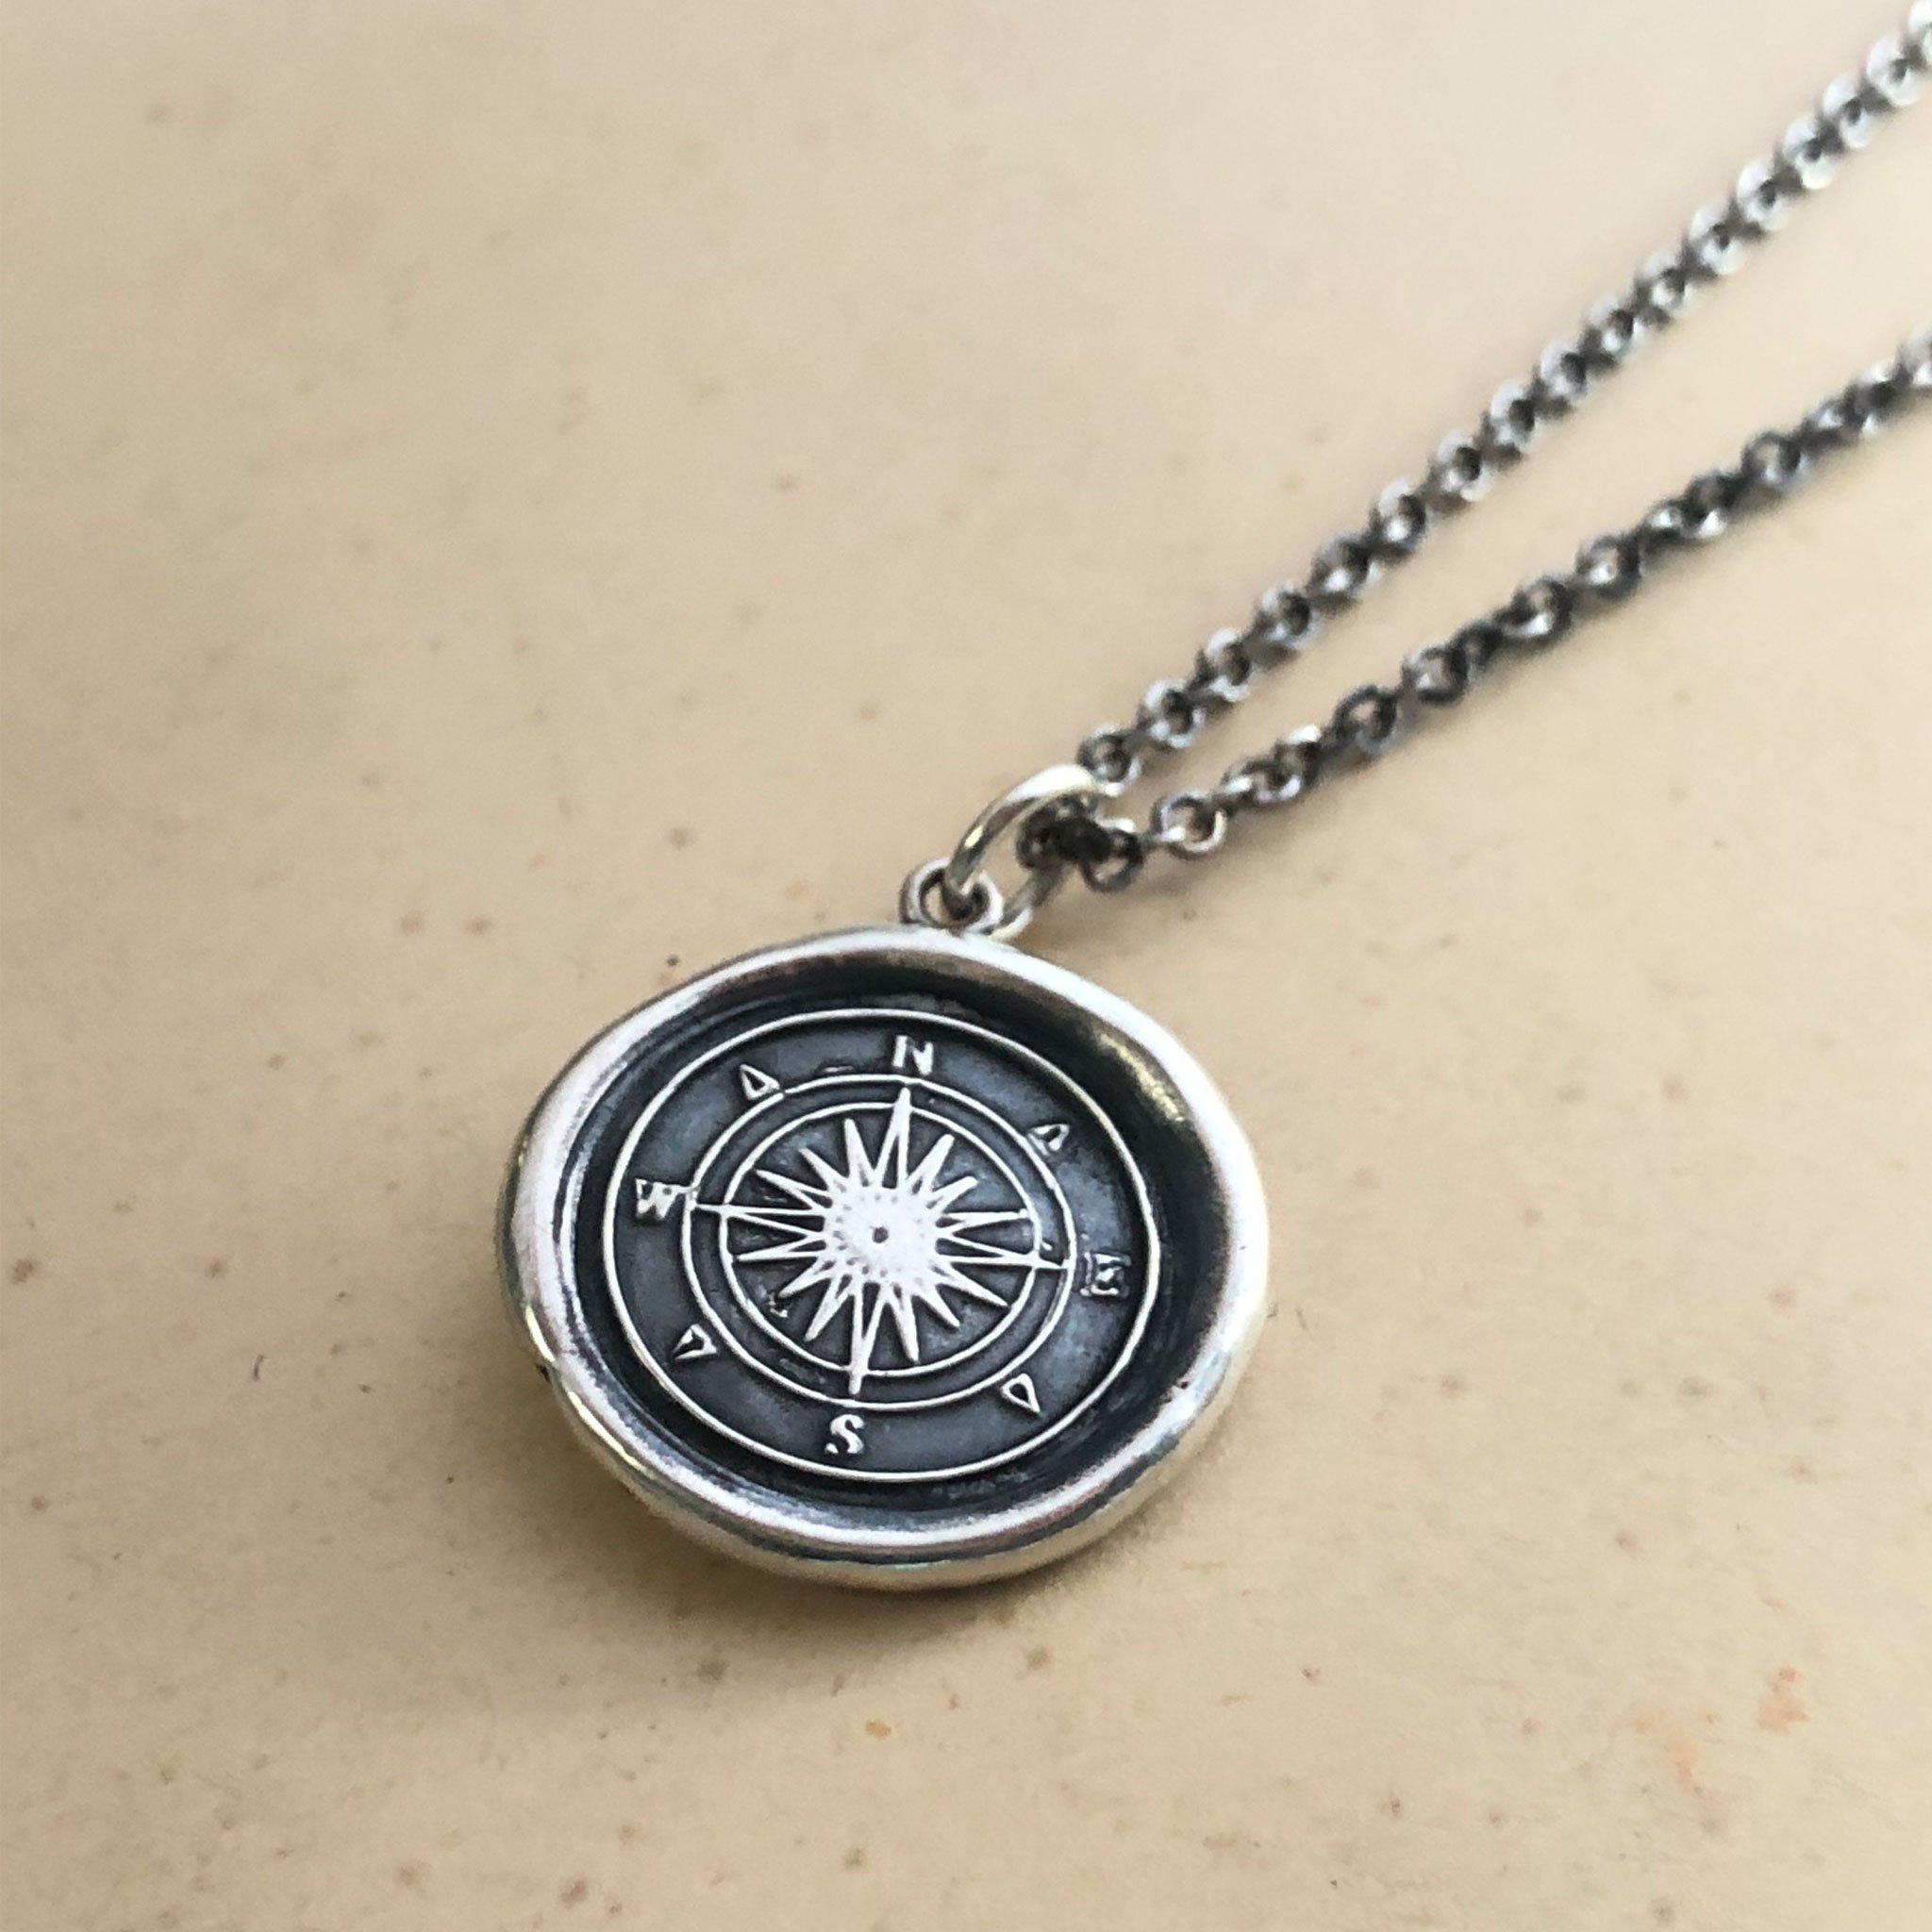 Madeinsea© - Compass Necklace Engraved